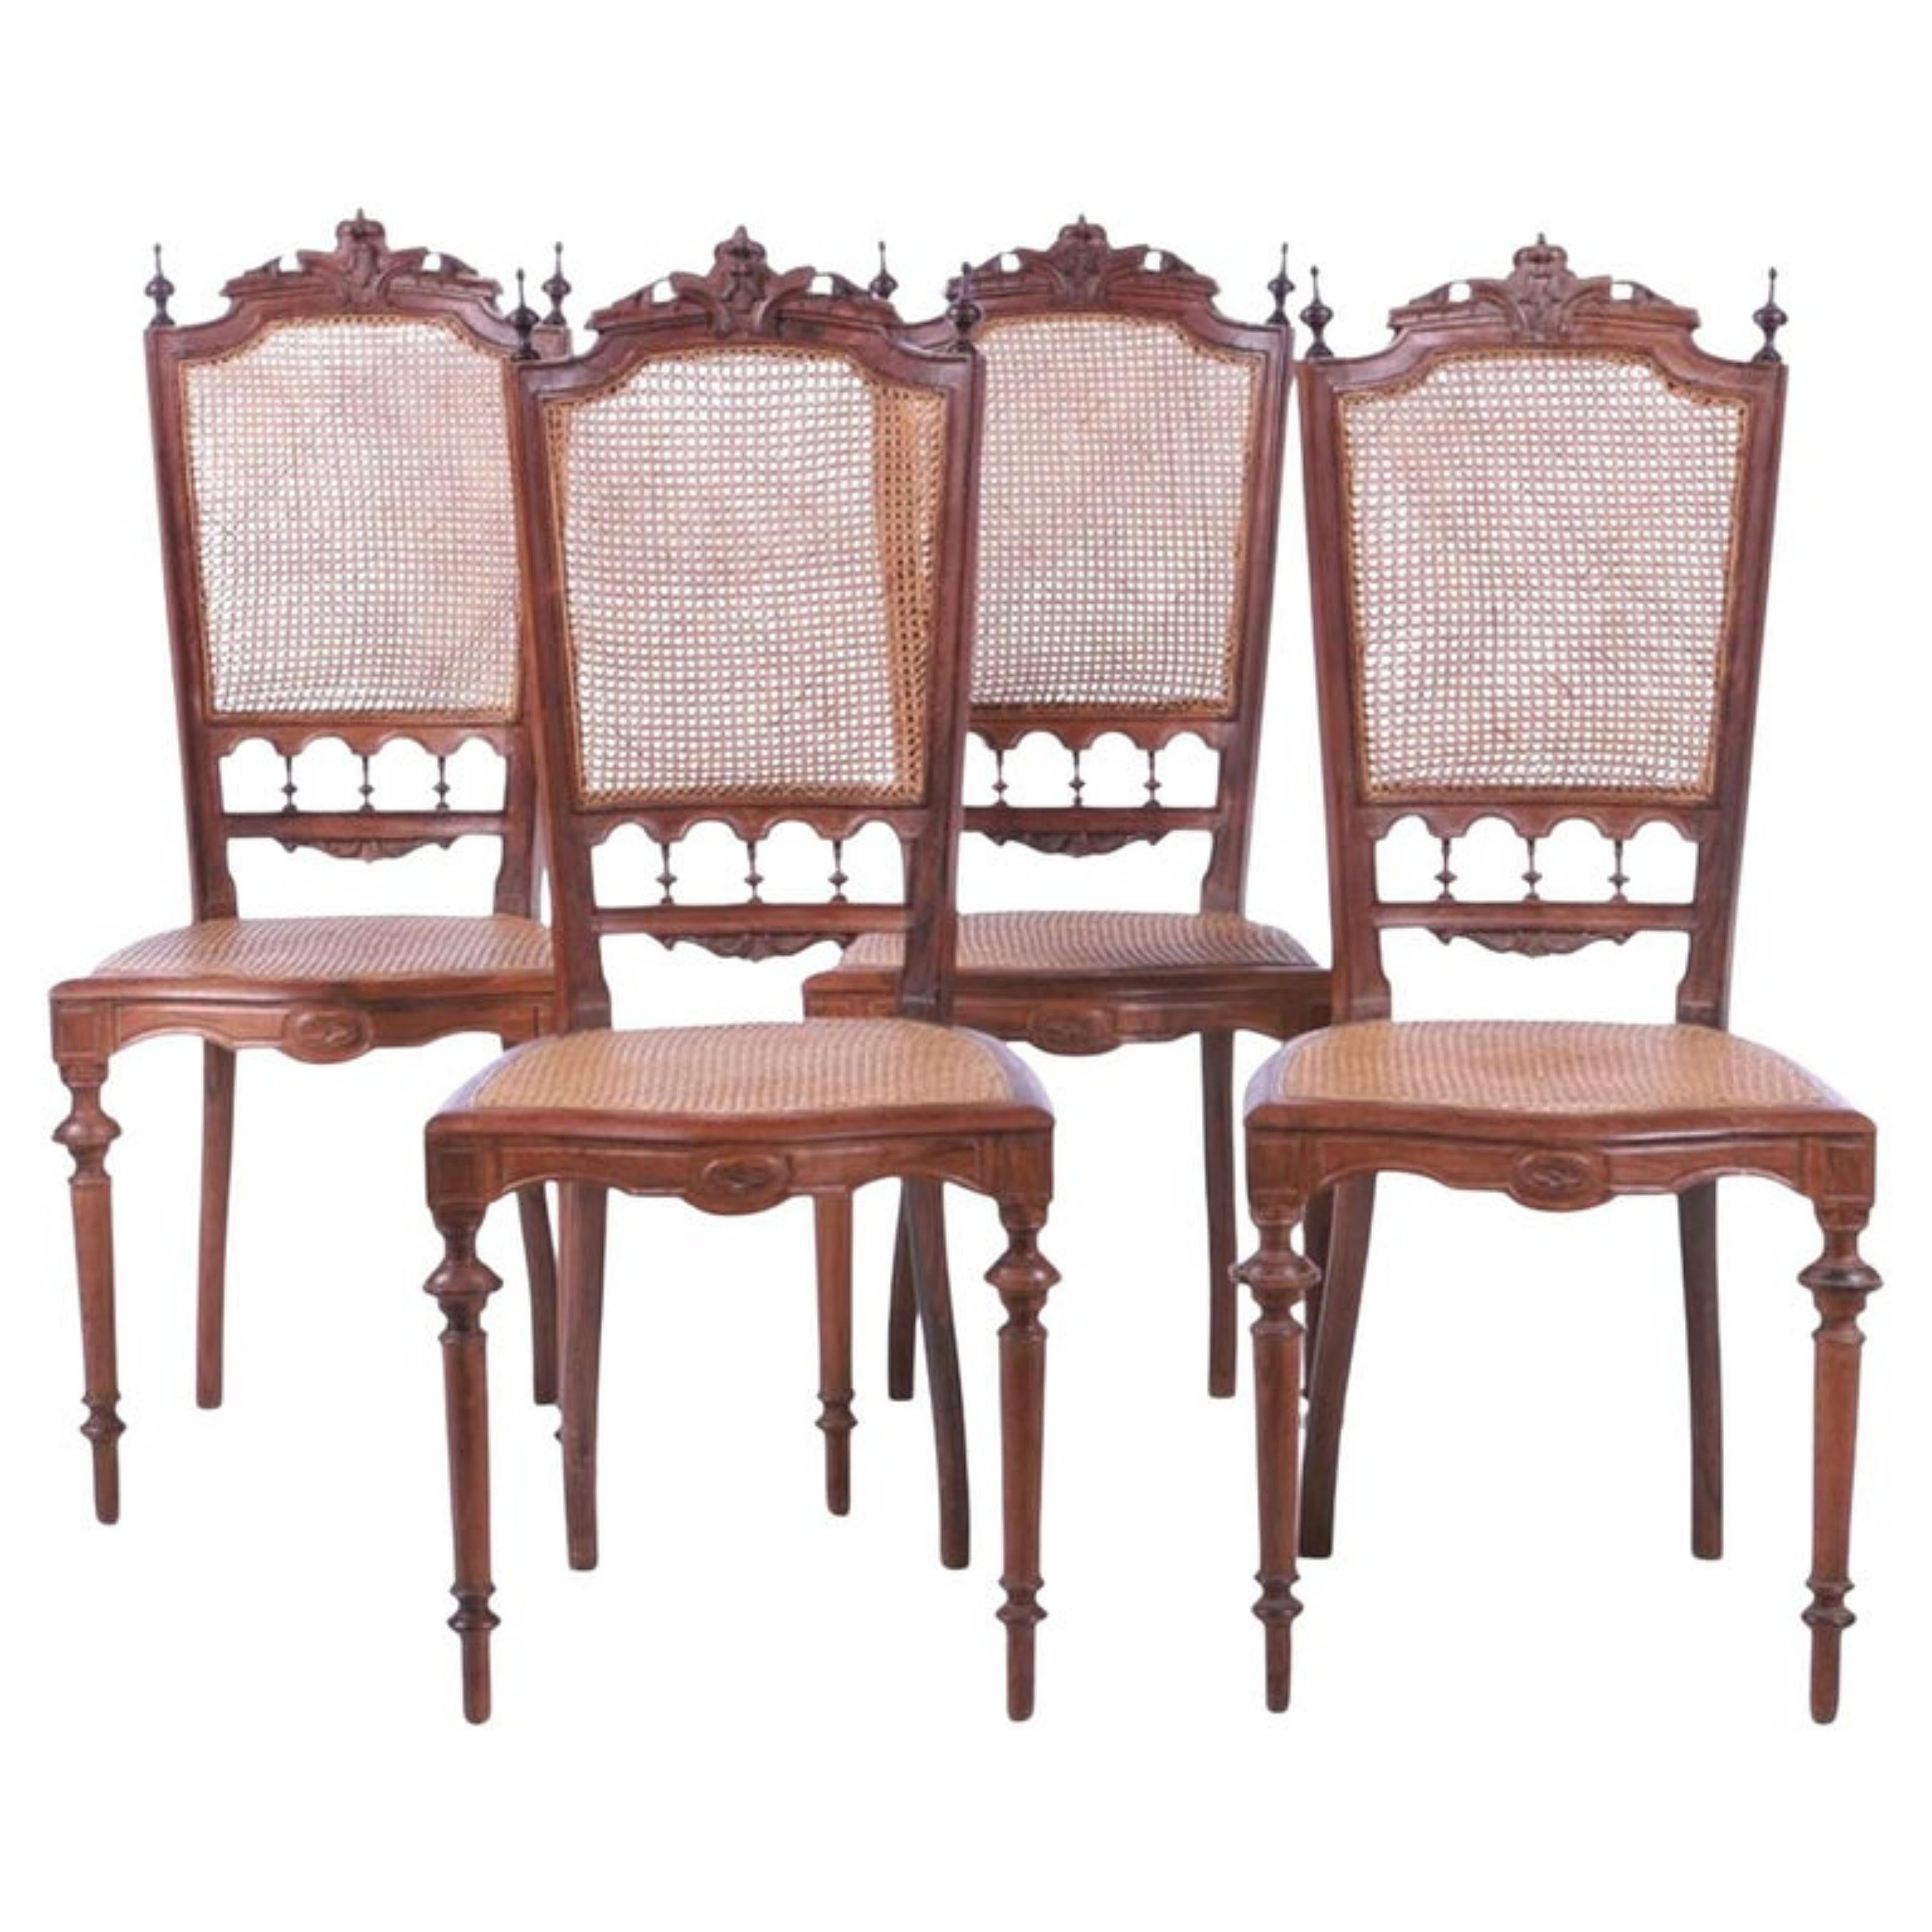 4 Portuguese Chairs 19th Century in Brazilian Rosewood For Sale 1